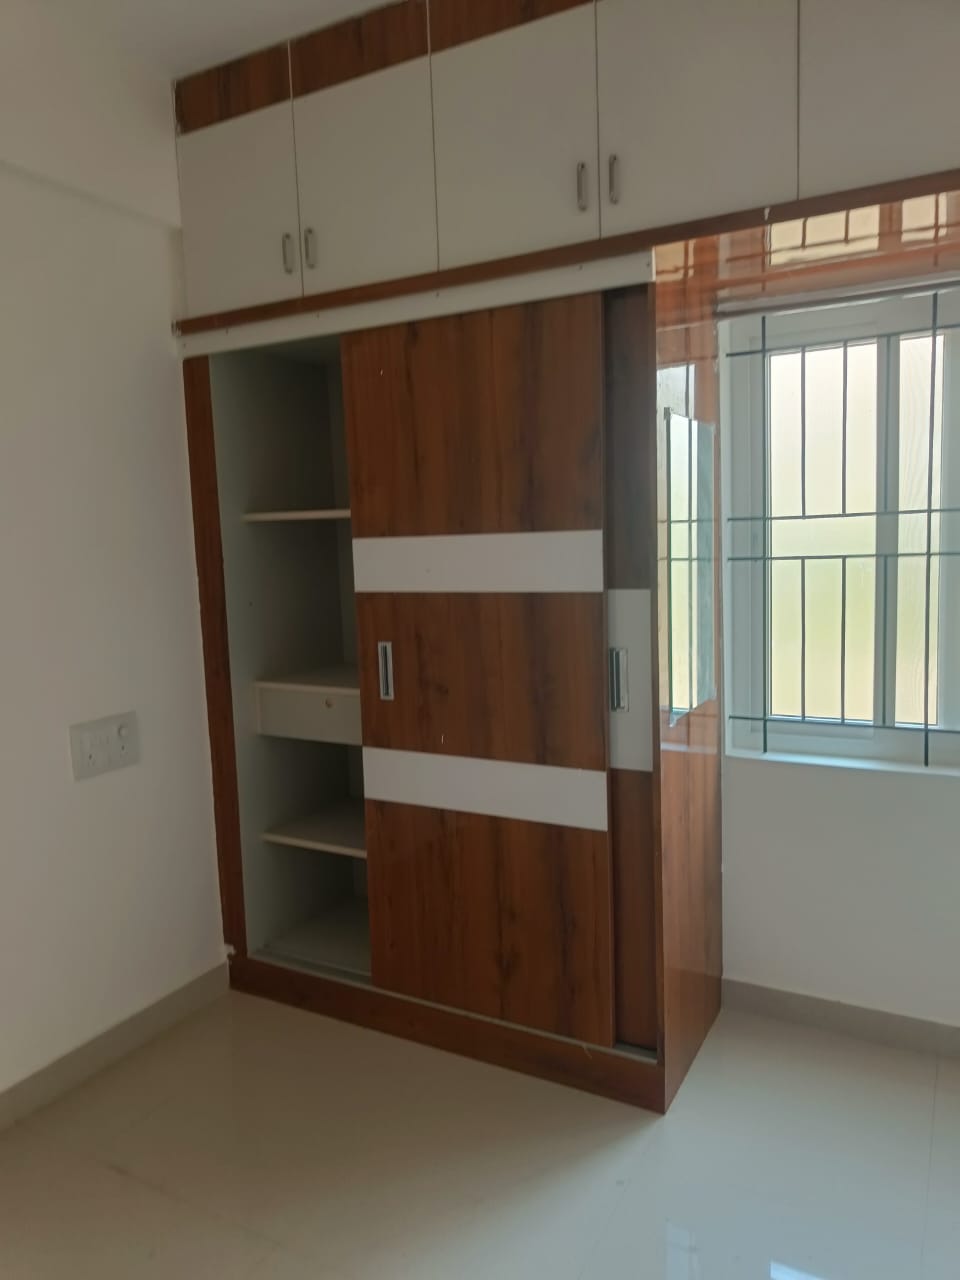 1 BHK Independent House for Lease Only at JAML2 - 4128 in Choodasandra